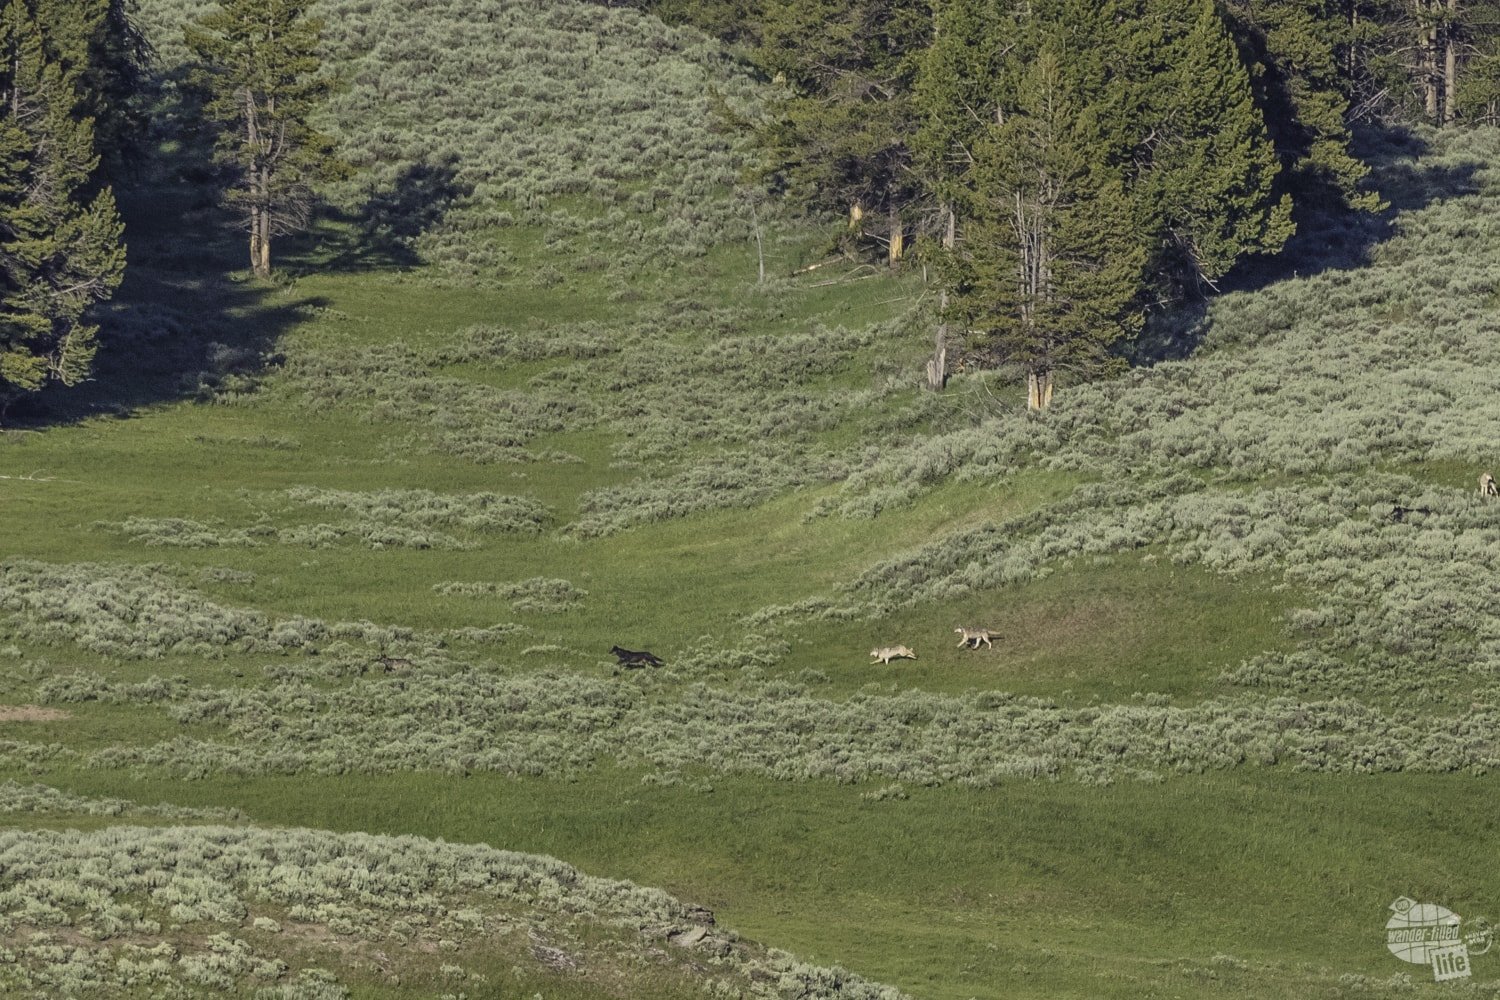 Wolves chasing elk at Yellowstone.